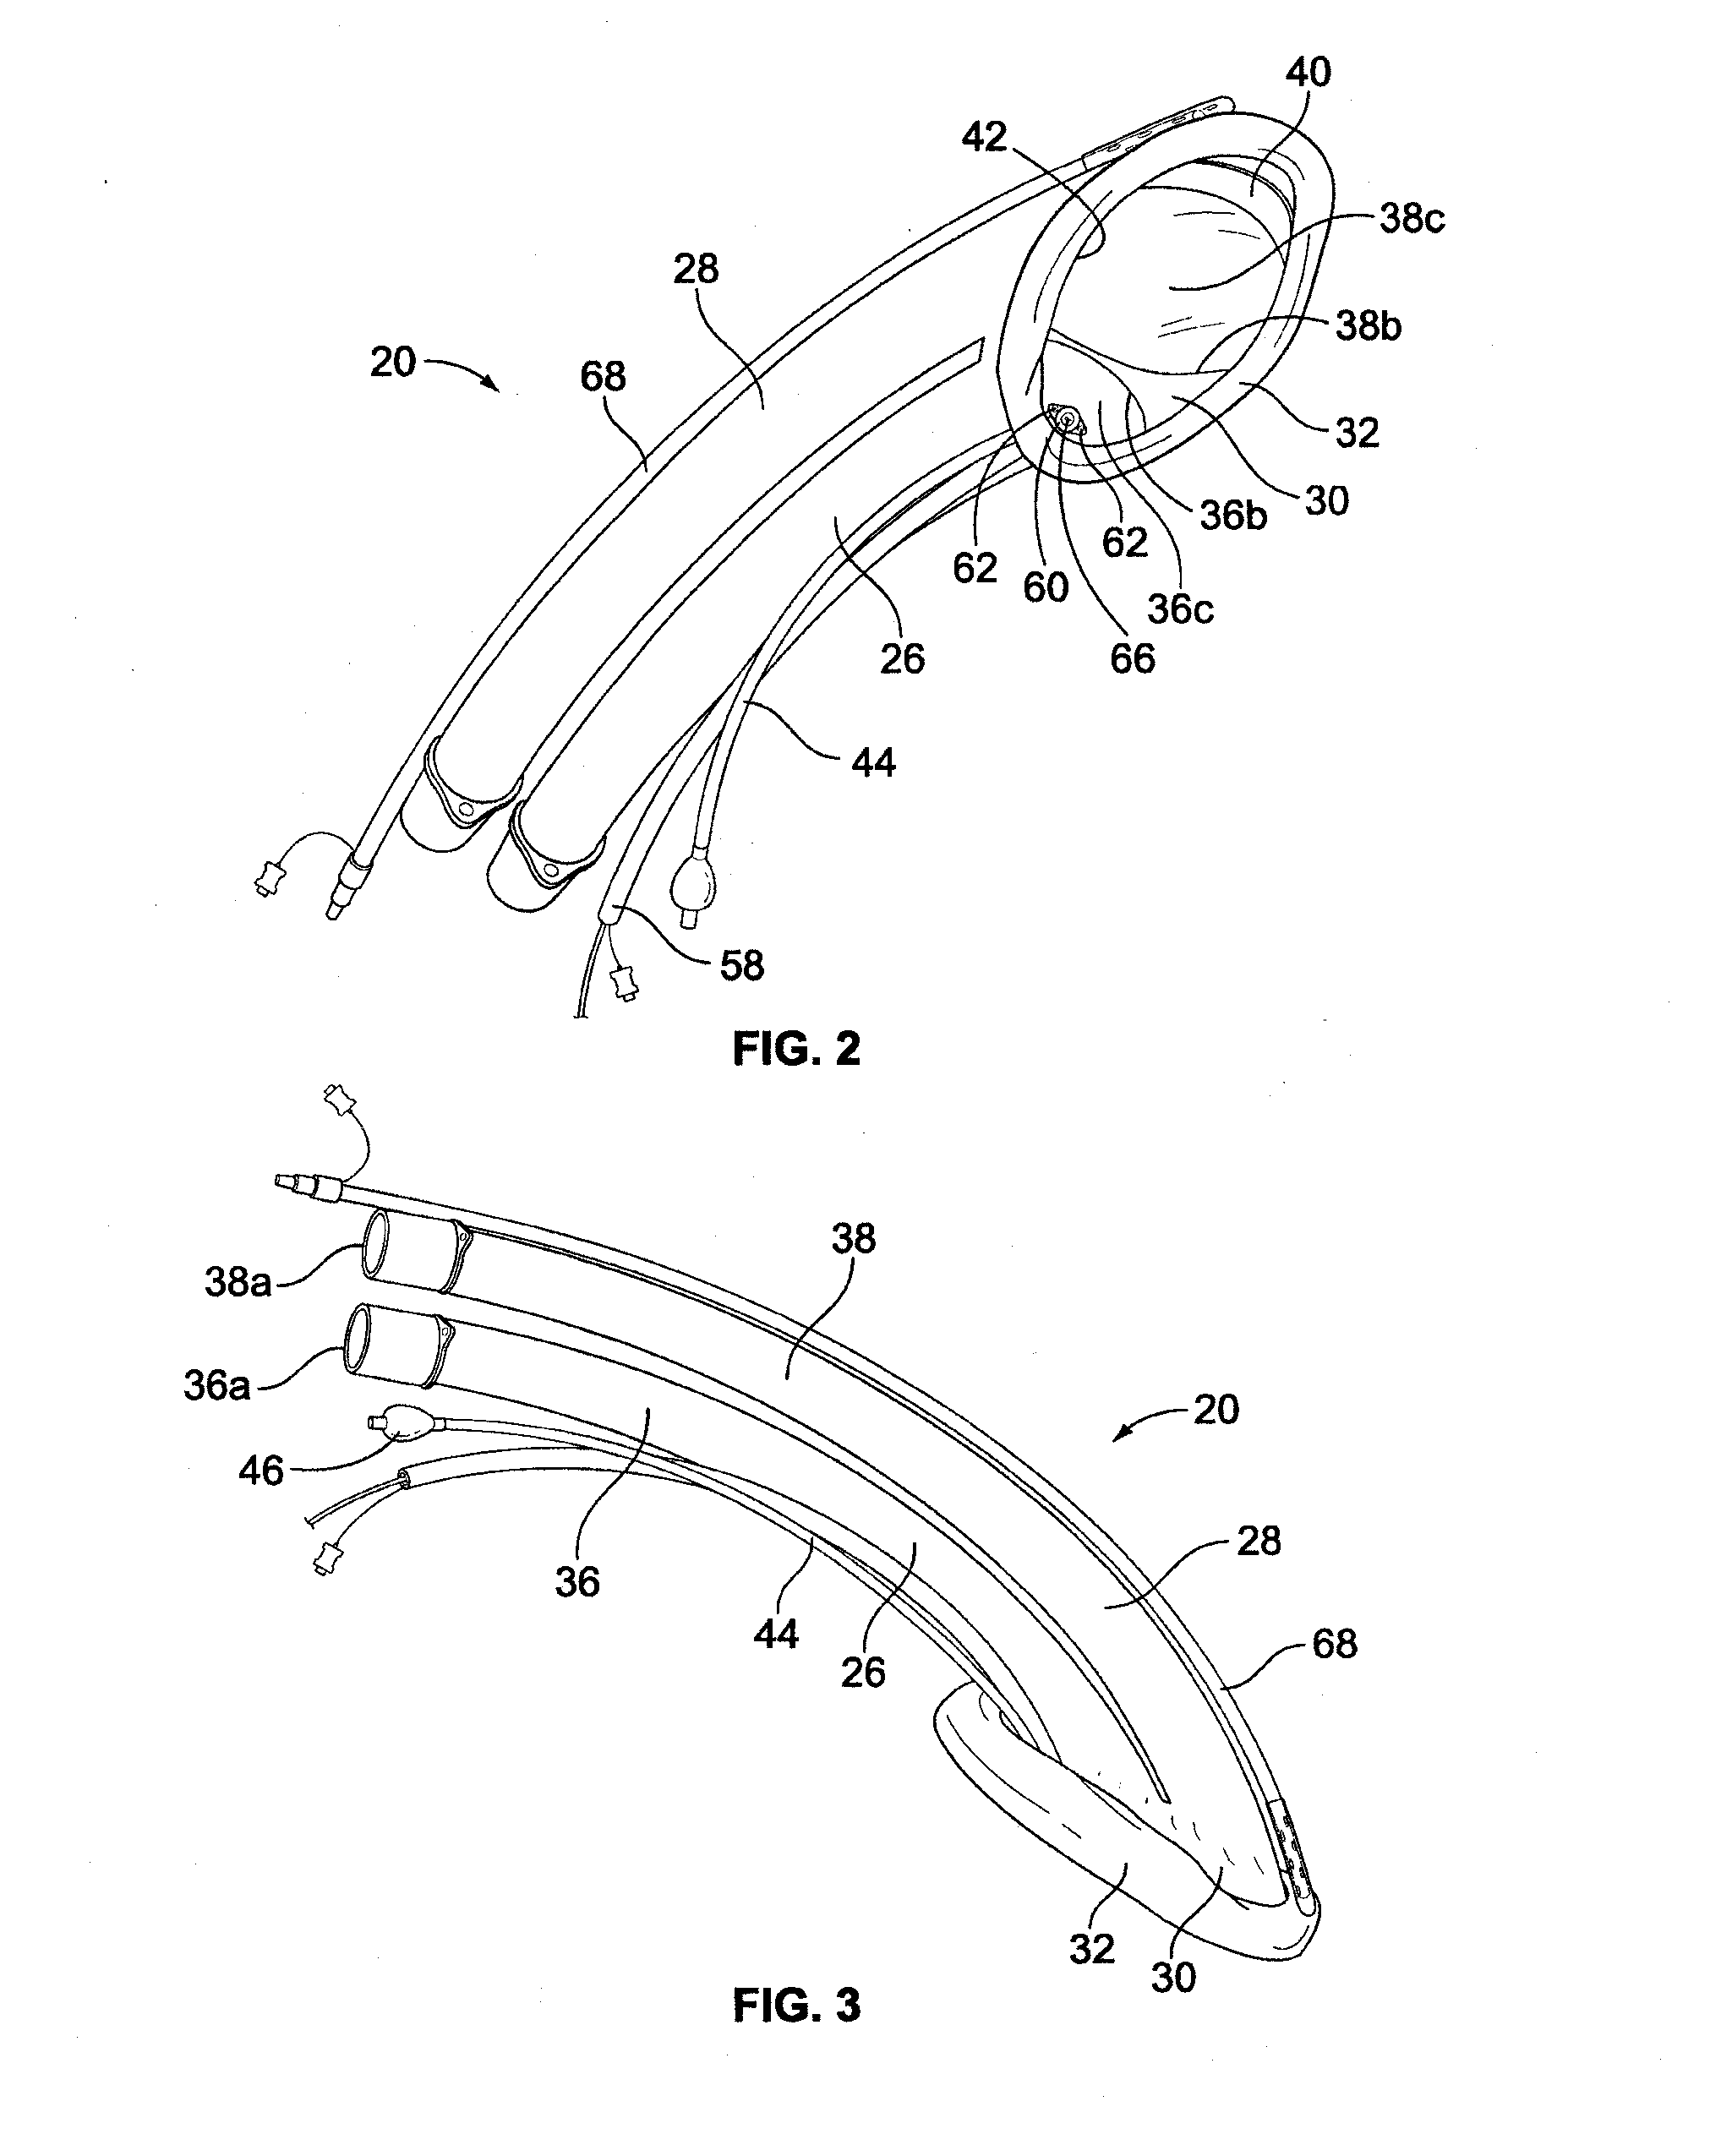 Airway device, airway assist device and the method of using same